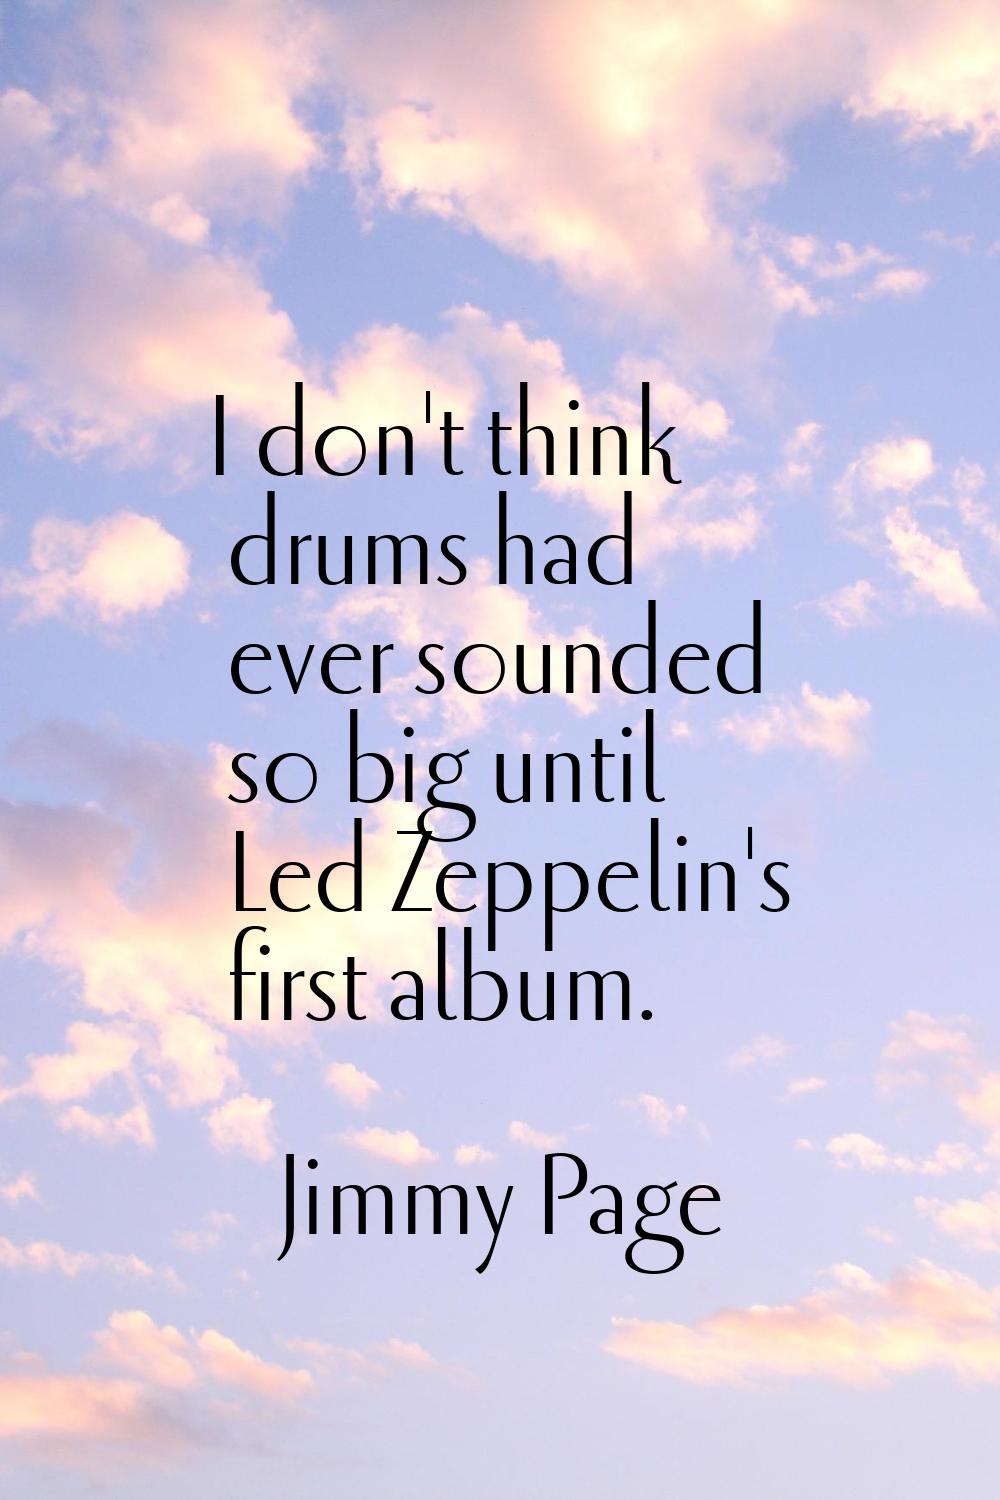 I don't think drums had ever sounded so big until Led Zeppelin's first album.